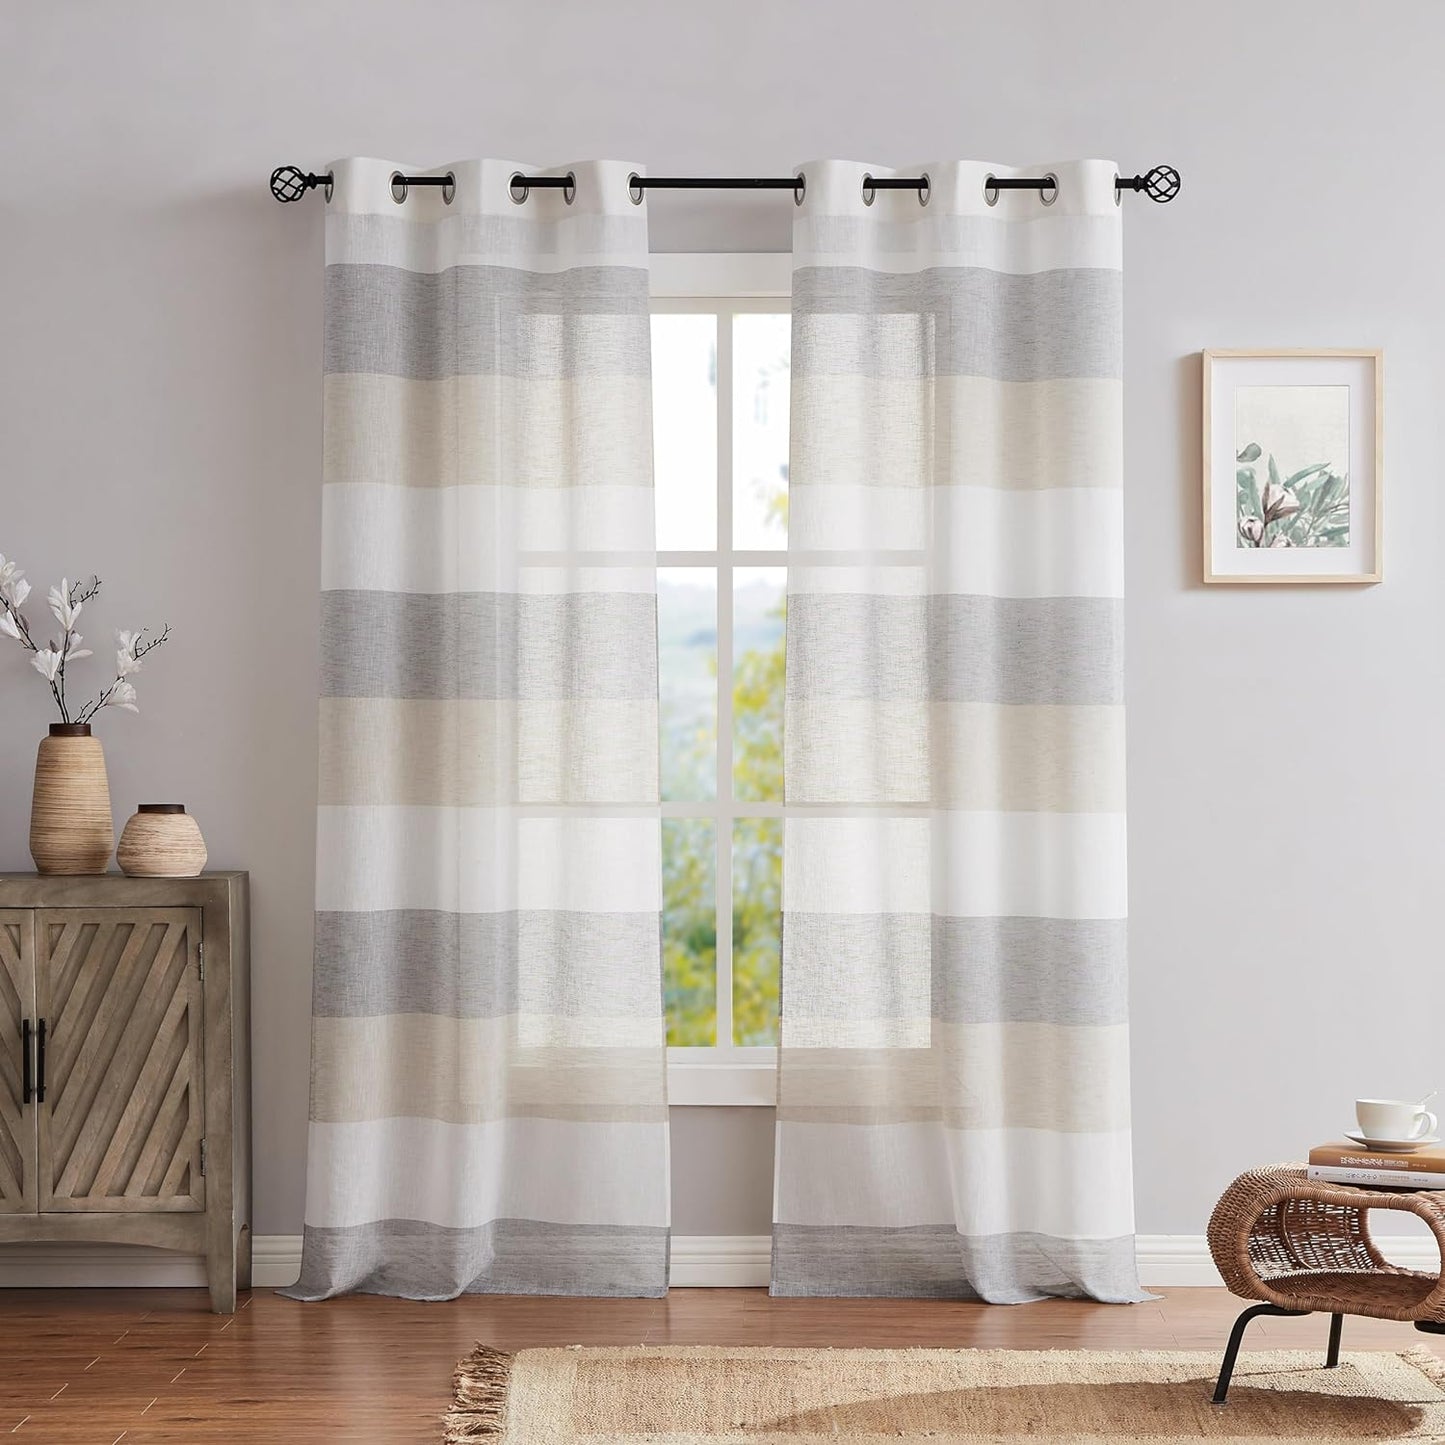 Central Park Gray Tan Stripe Sheer Color Block Window Curtain Panel Linen Window Treatment for Bedroom Living Room Farmhouse 84 Inches Long with Grommets, 2 Panel Rustic Drapes  Central Park Gray/Tan 40"X95"X2 